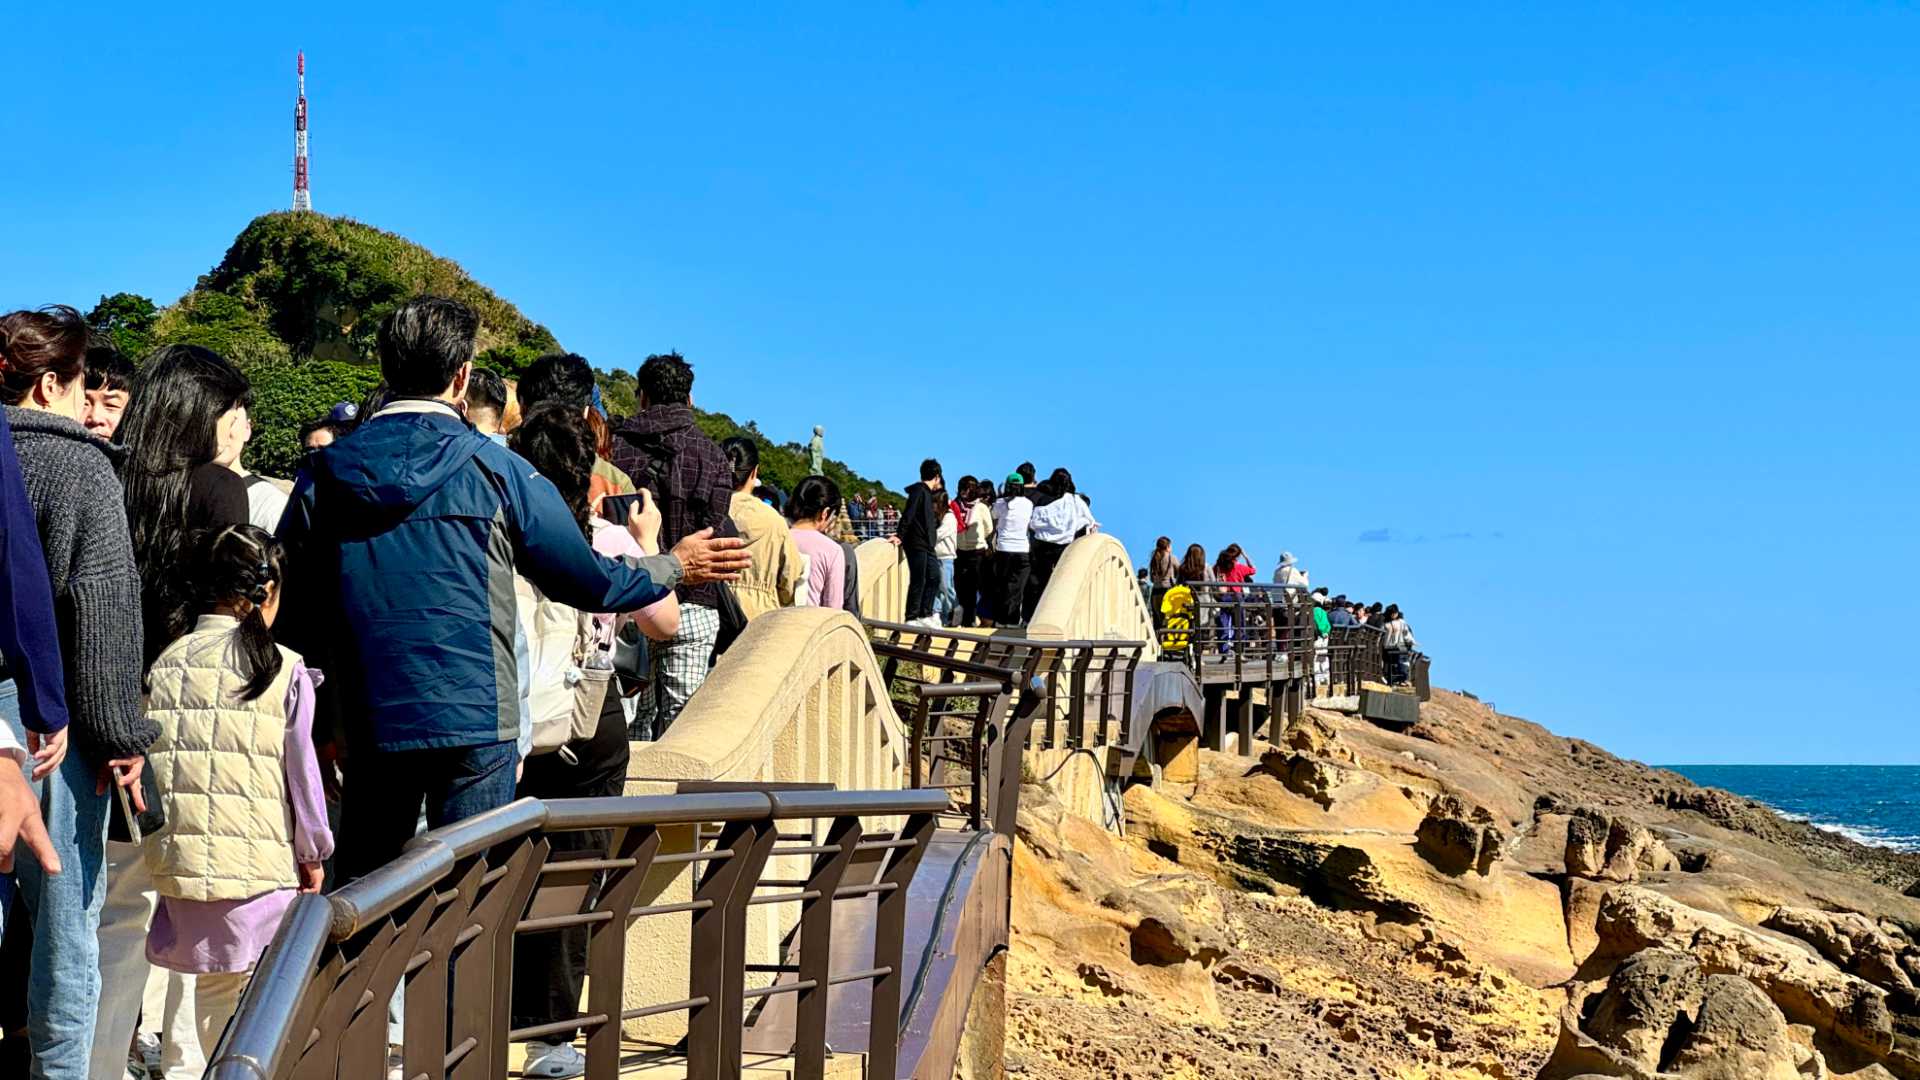 A queue of hundreds of people walking on a pathway next to the shore.